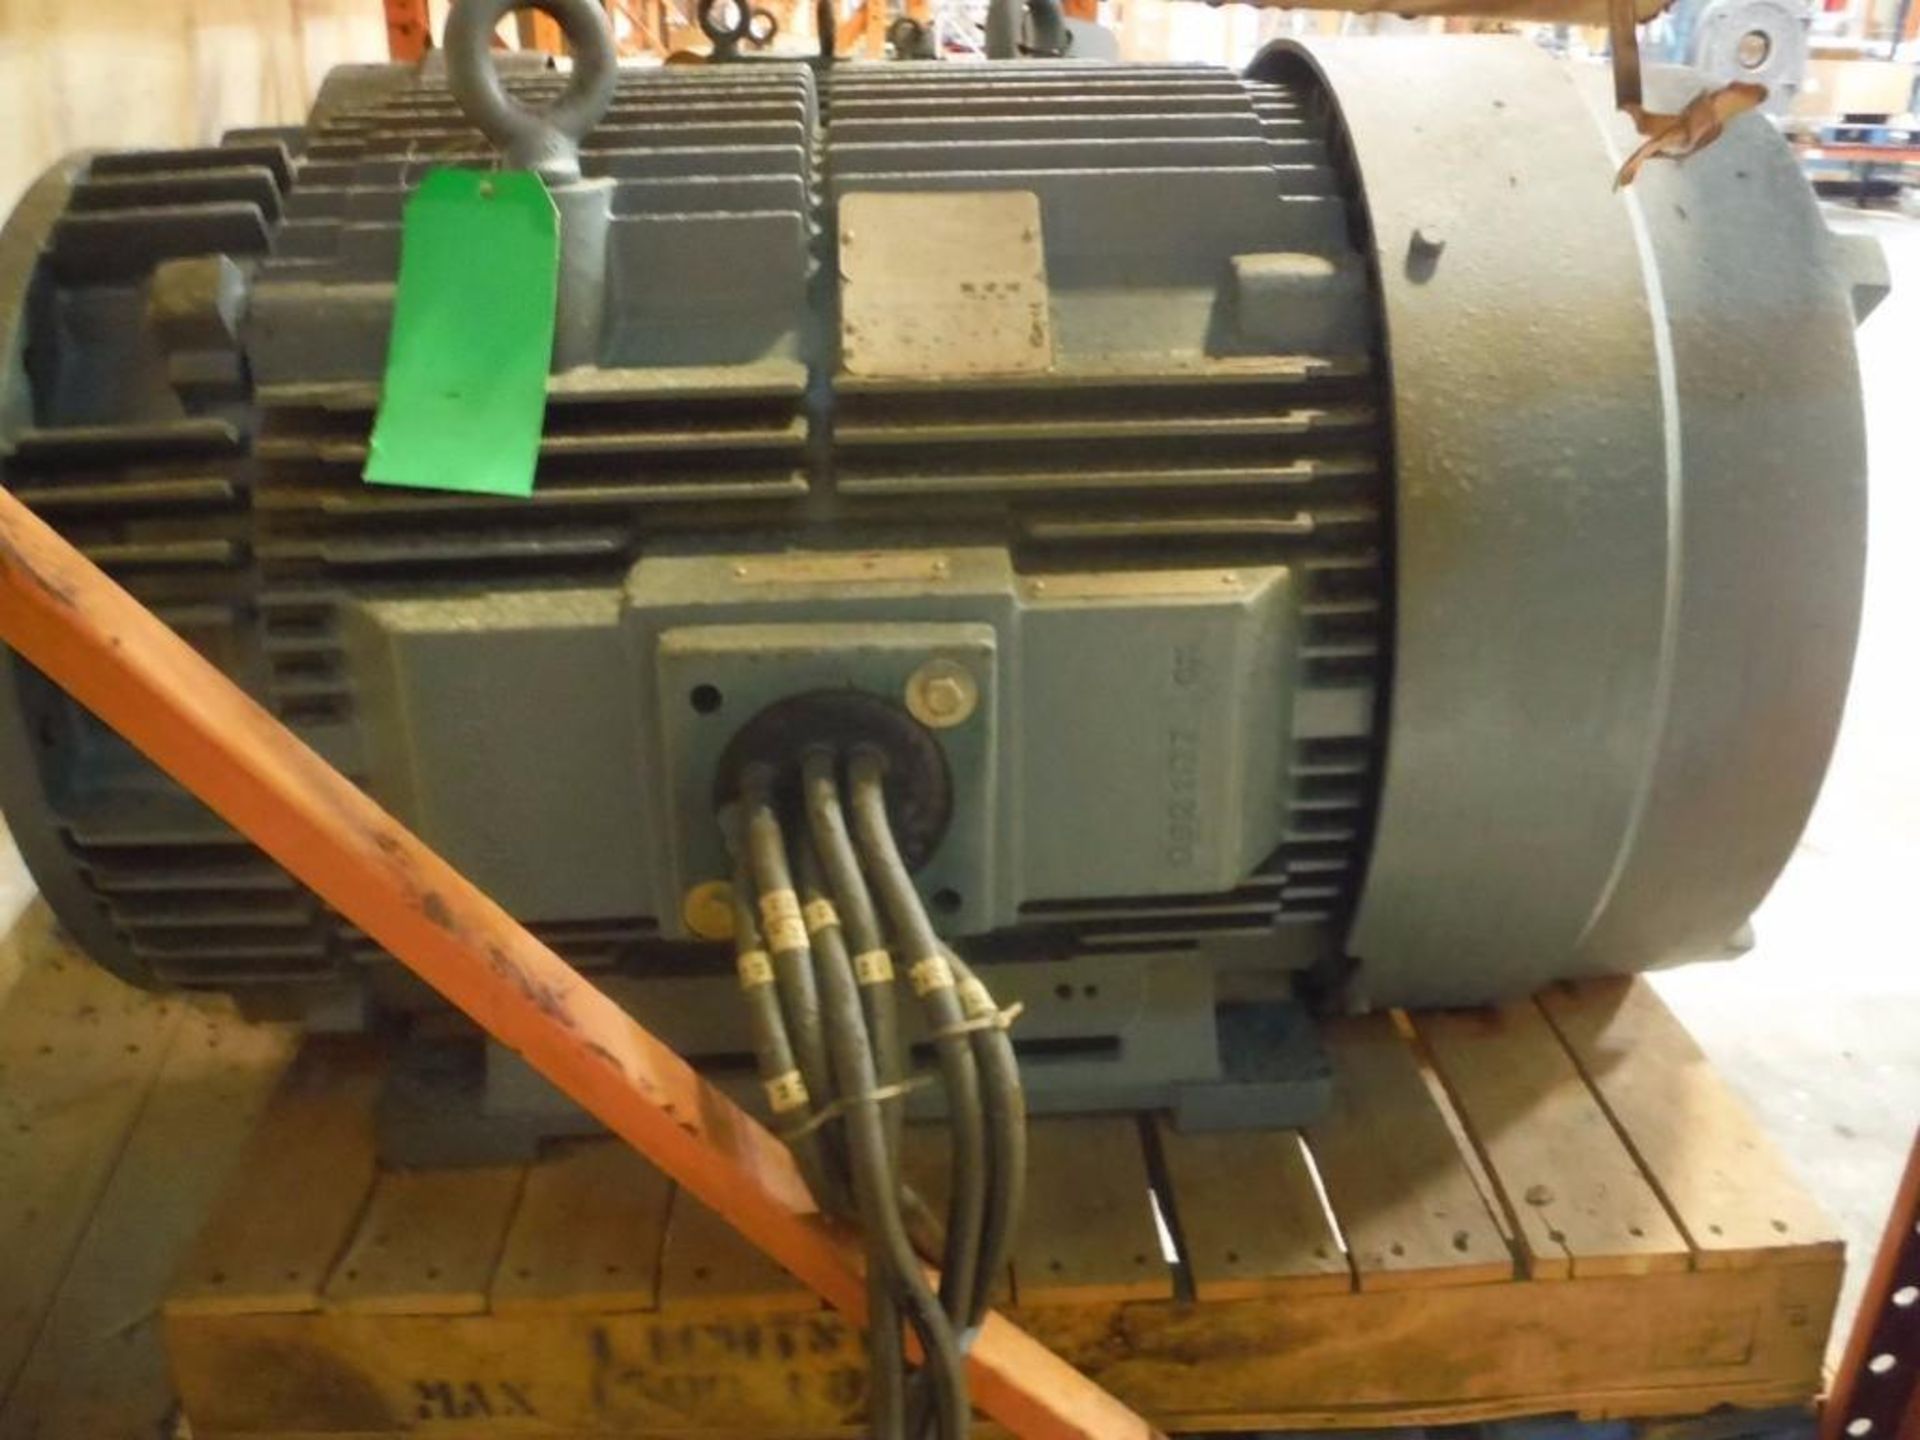 Reliance Electric 200HP Motor, Frame: 447TY  Rigging Fee: $20 - Image 2 of 4